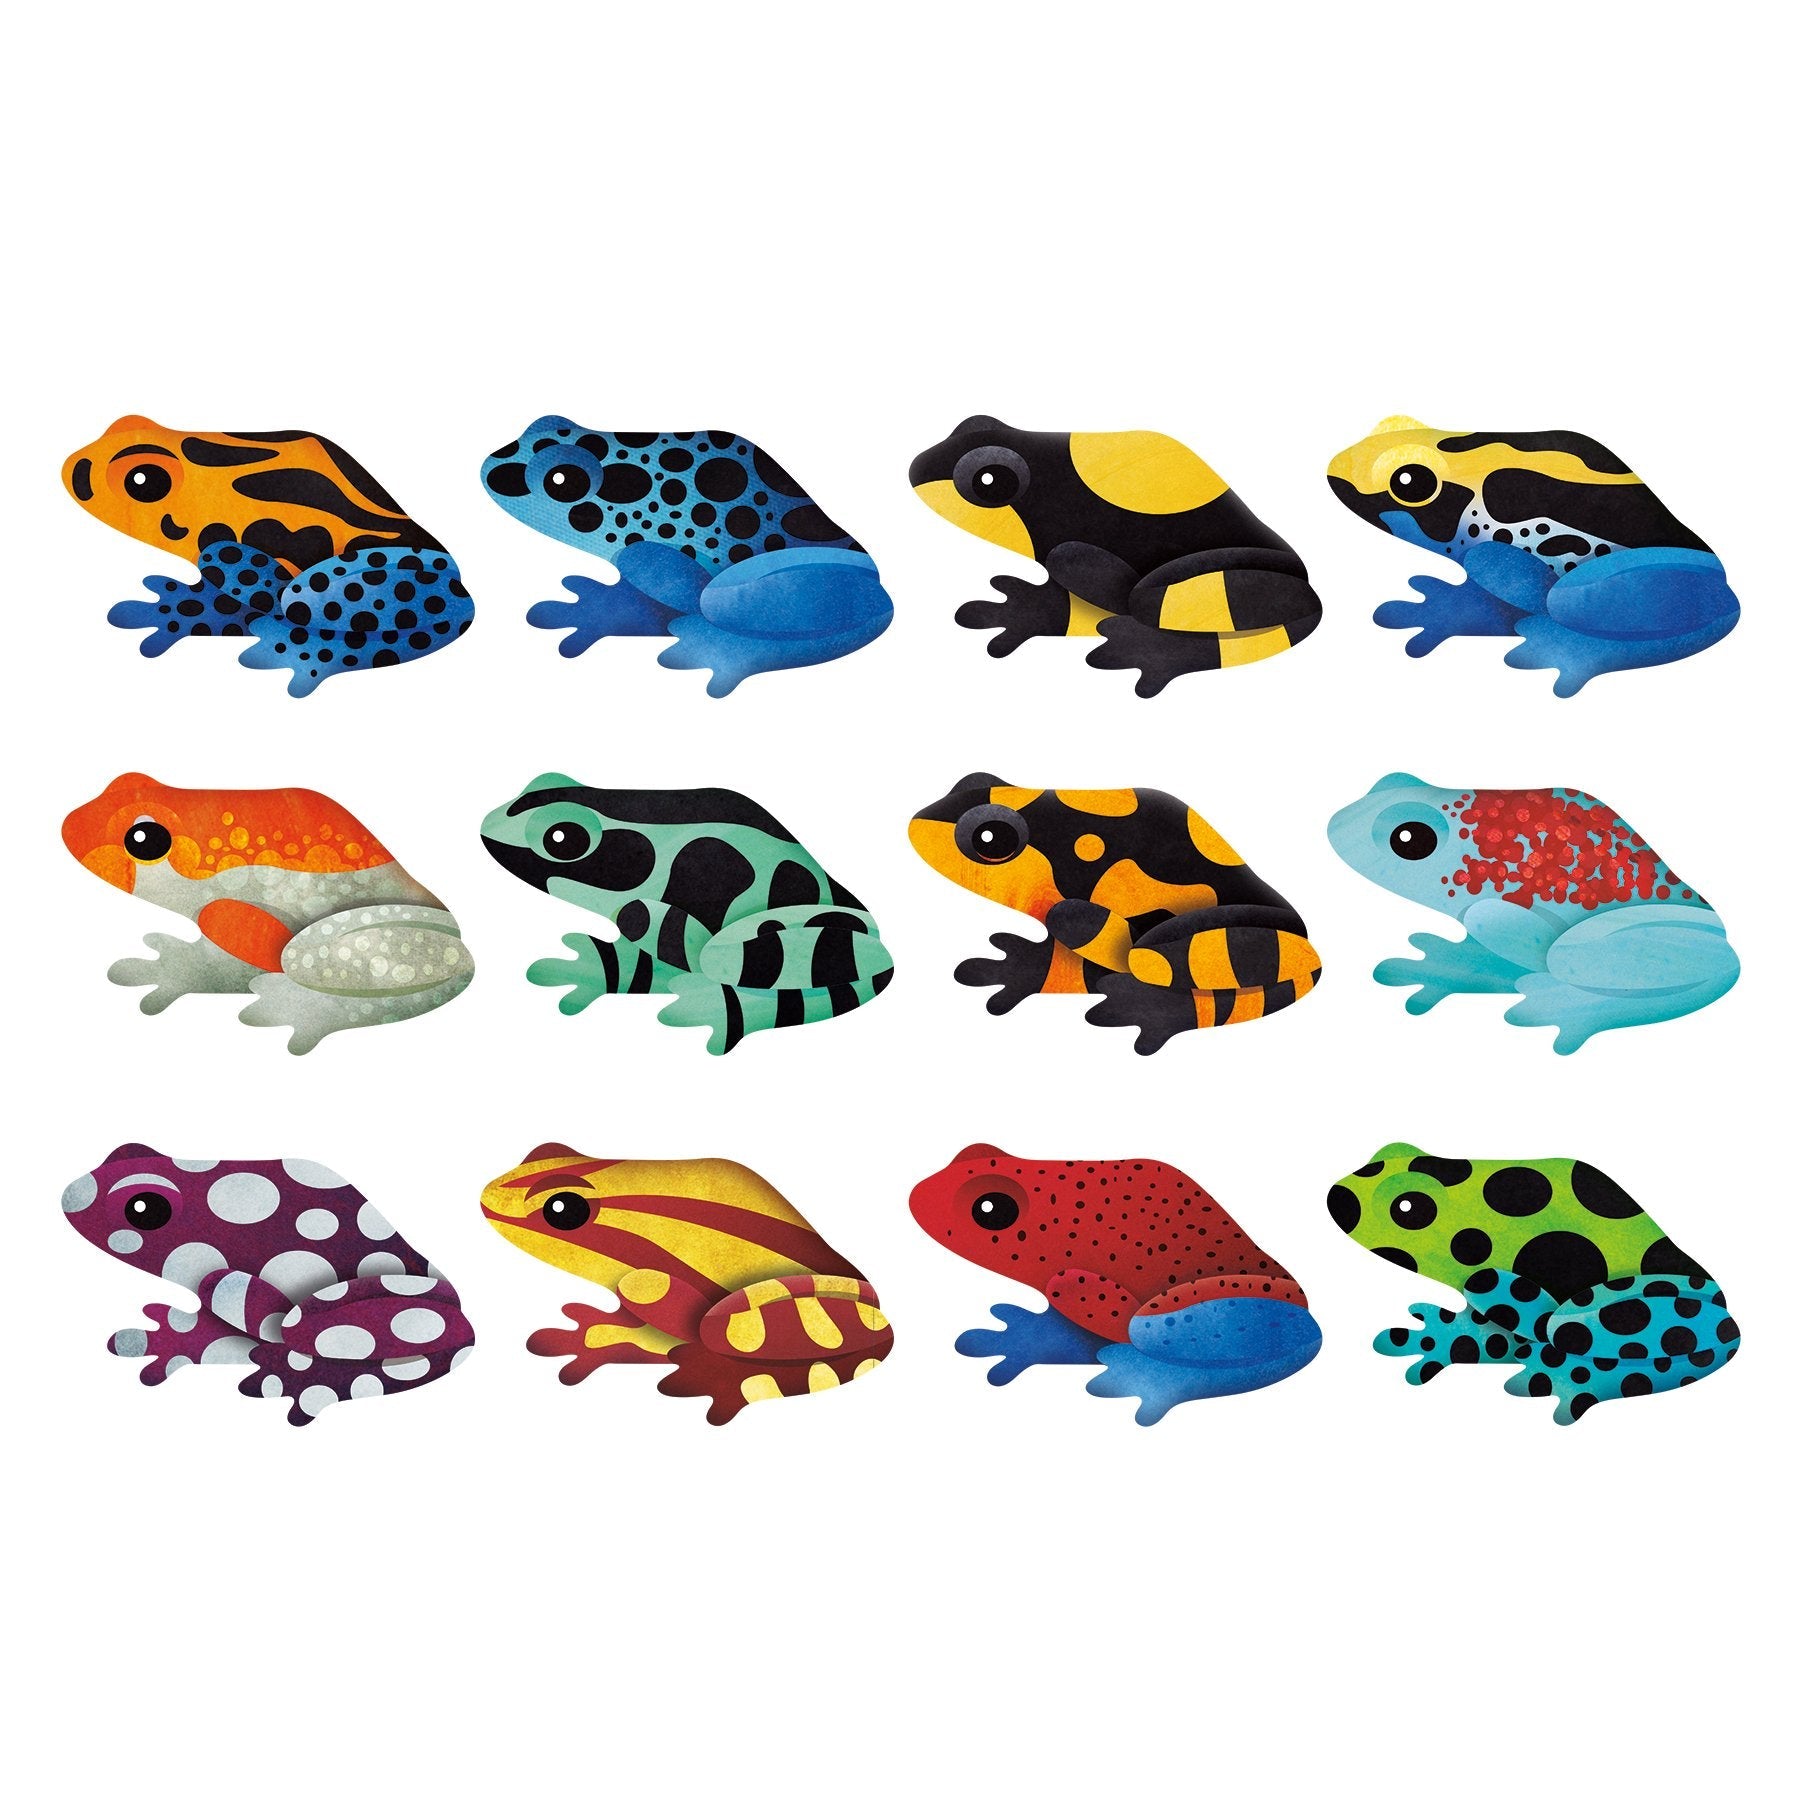 Shaped Memory Match: Tropical Frogs [Book]